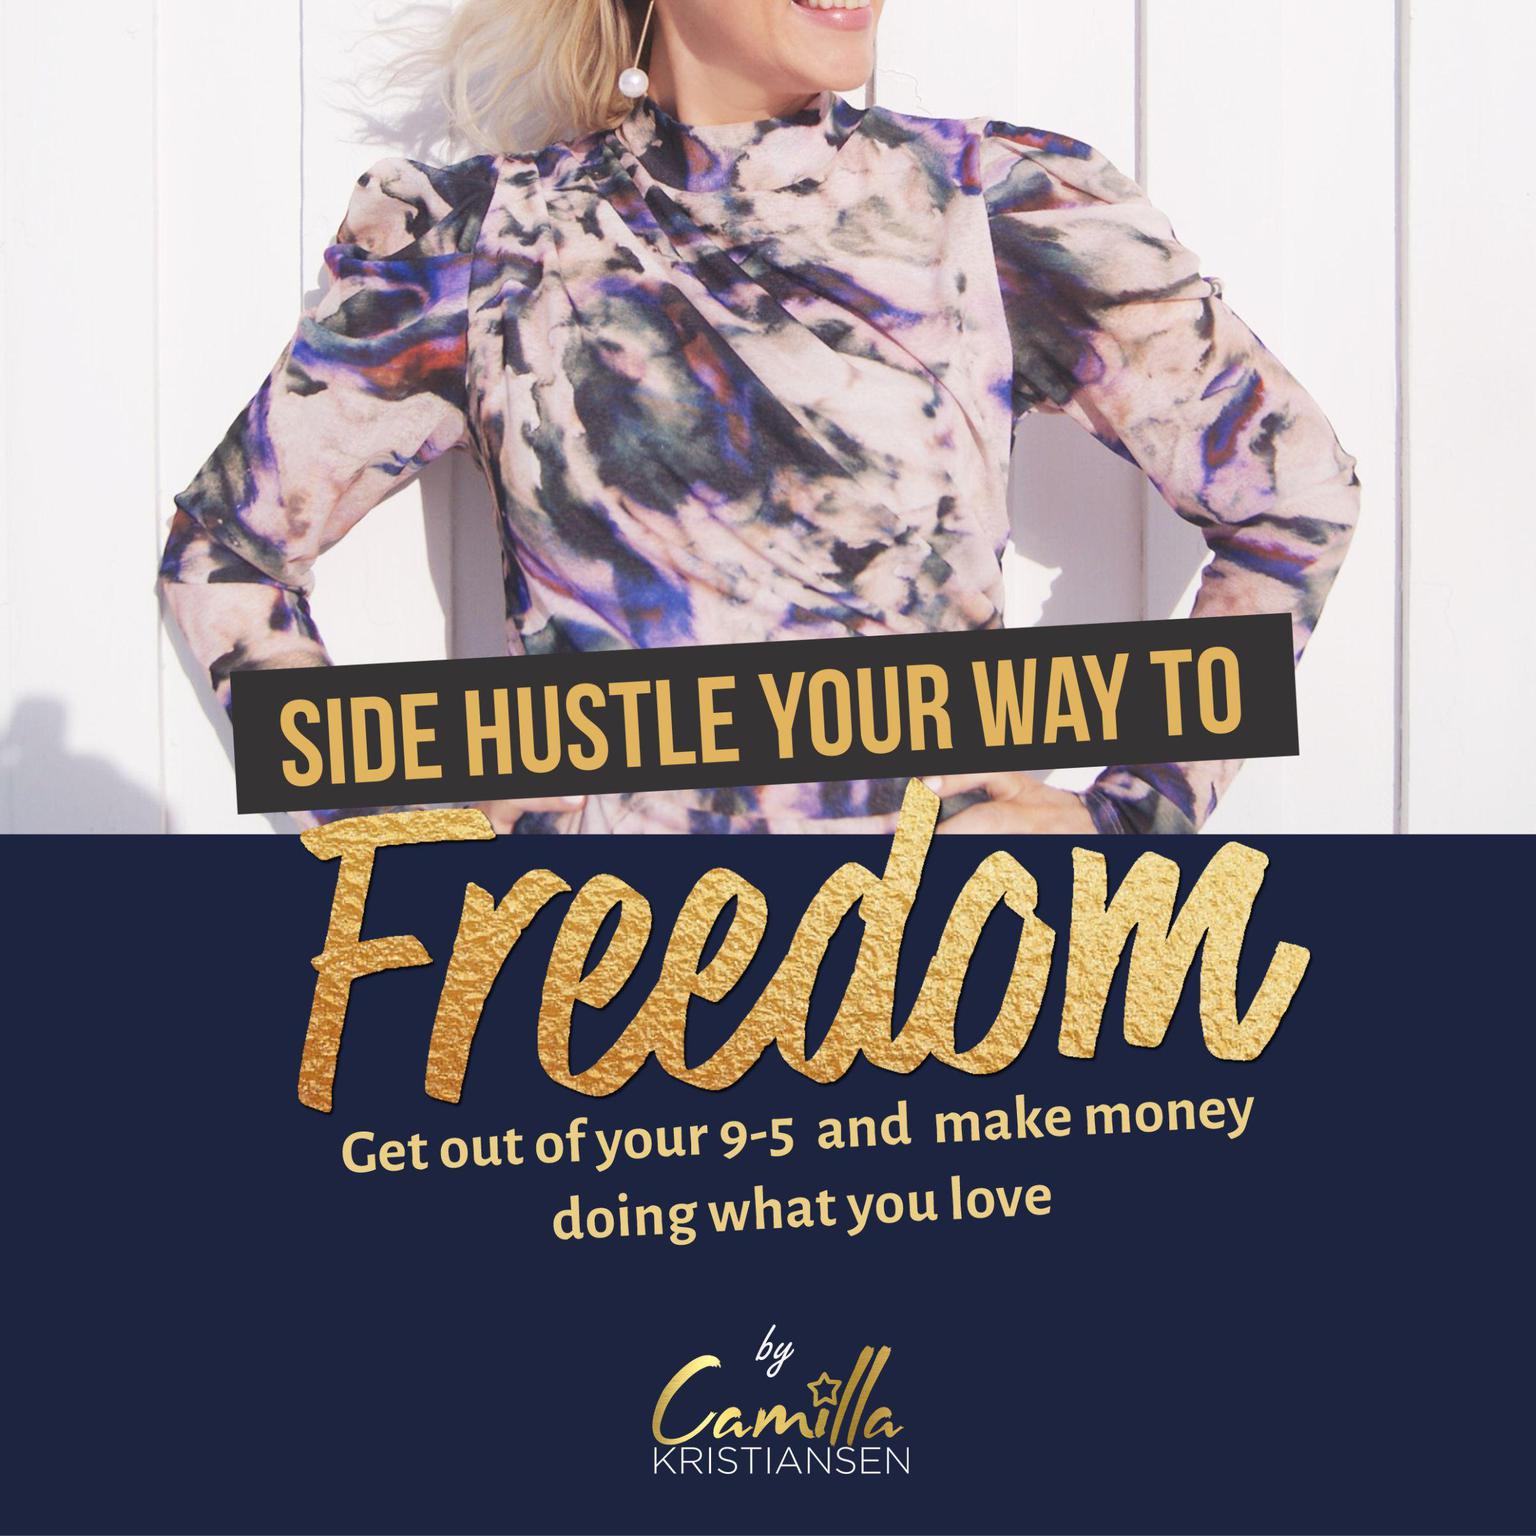 Side hustle your way to freedom! Get out of your 9-5 and make money doing what you love Audiobook, by Camilla Kristiansen